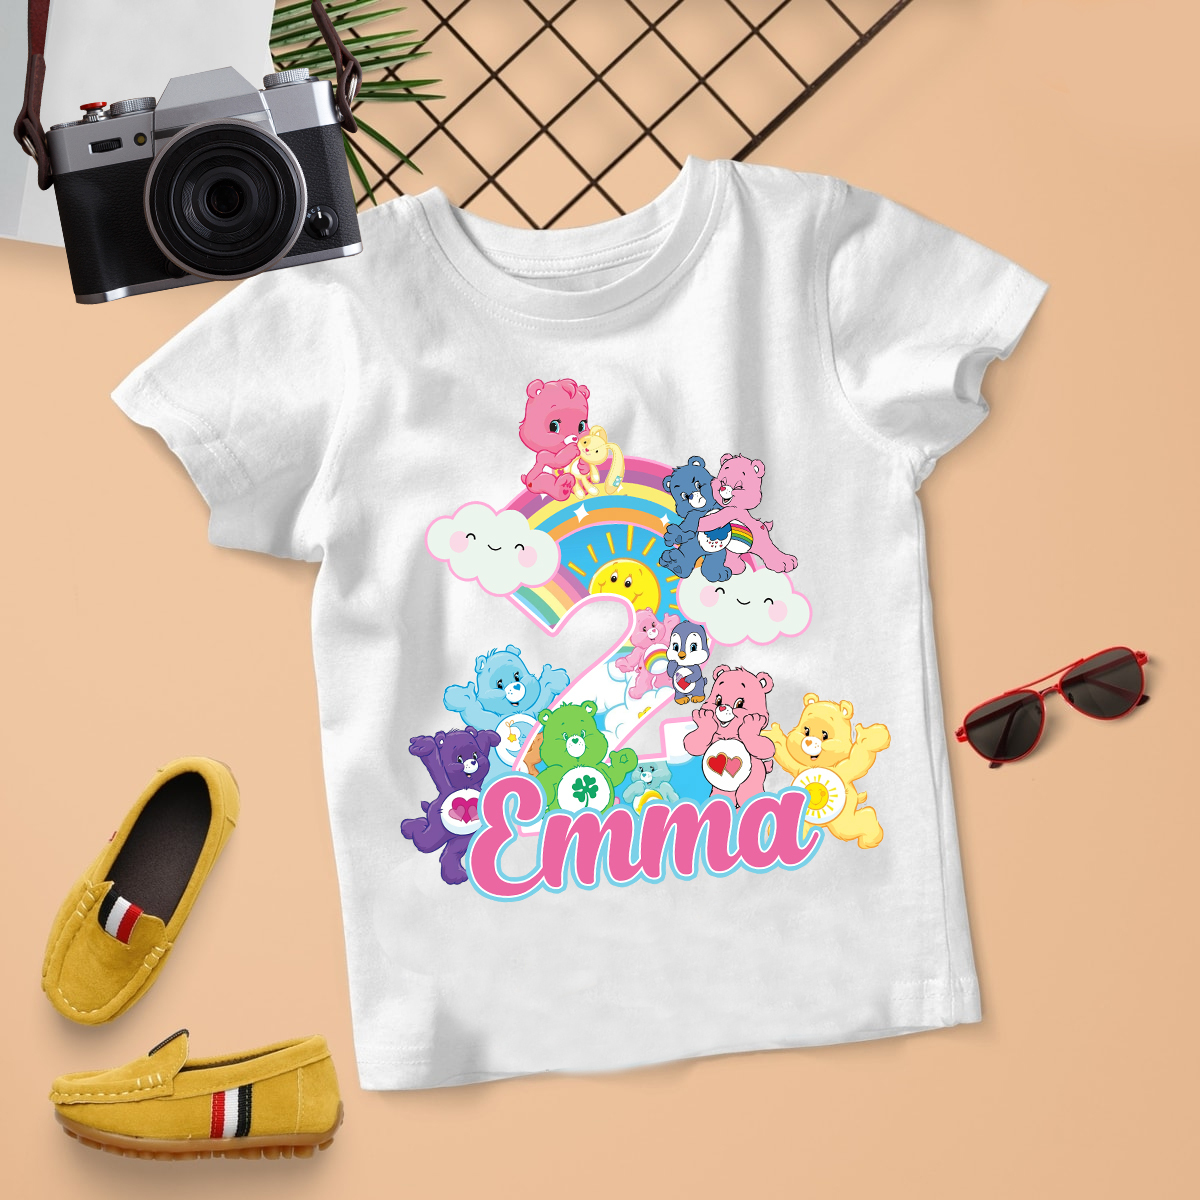 Personalized Care Bears Birthday Shirt, Care Bears Family Matching Shirt, Bears Party Shirt for Care Groups, Care Bears Tee, kids gift